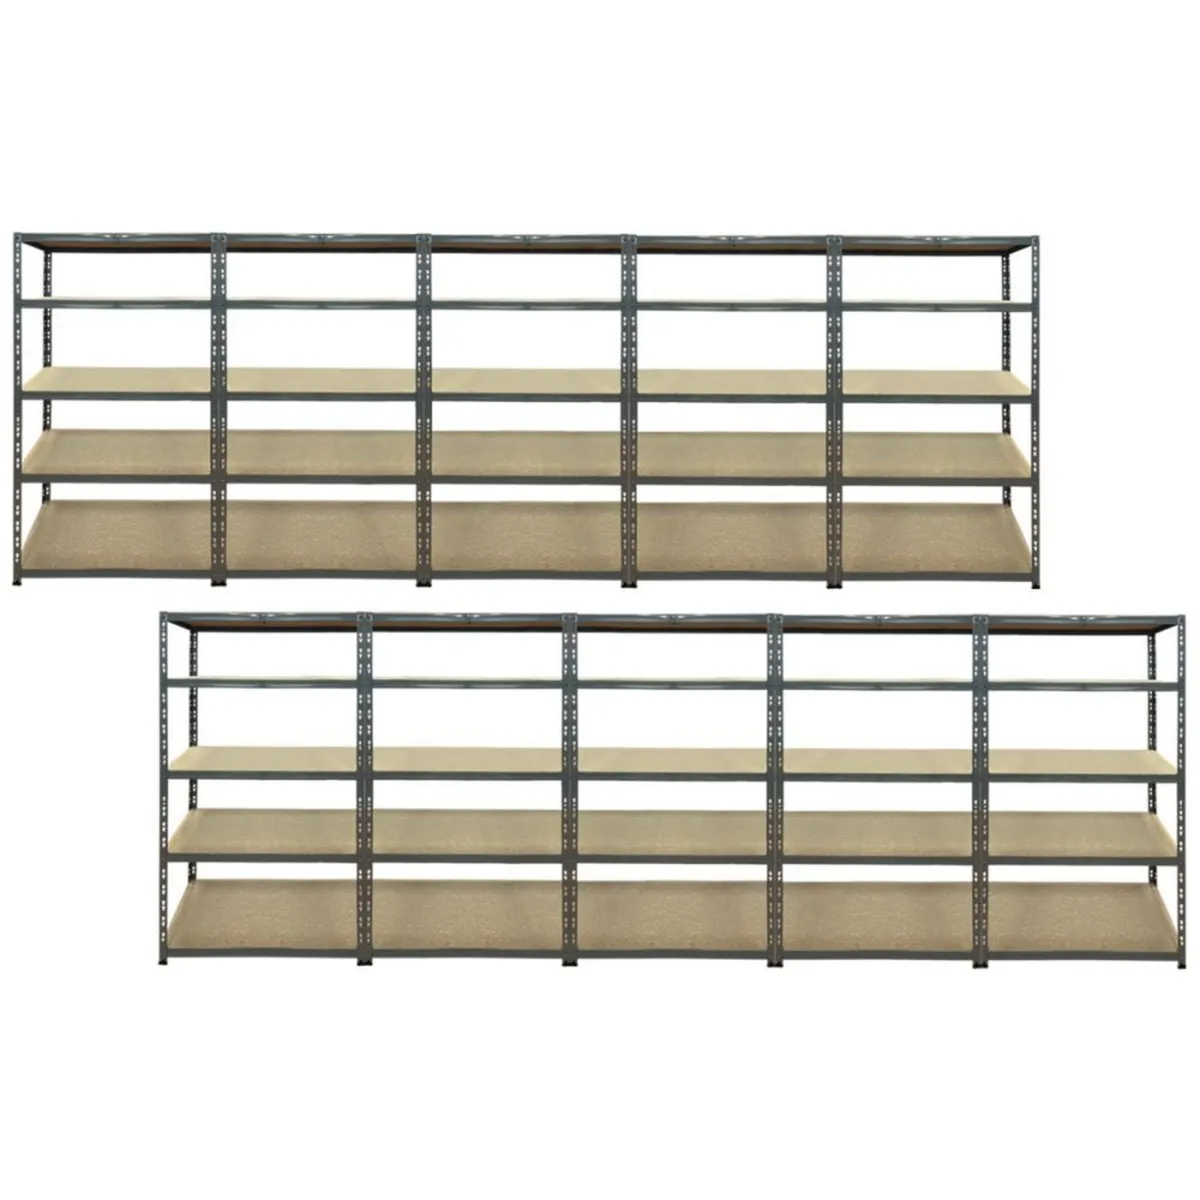 Shelving - 10 Bays 900W x 450D-Delivery Included